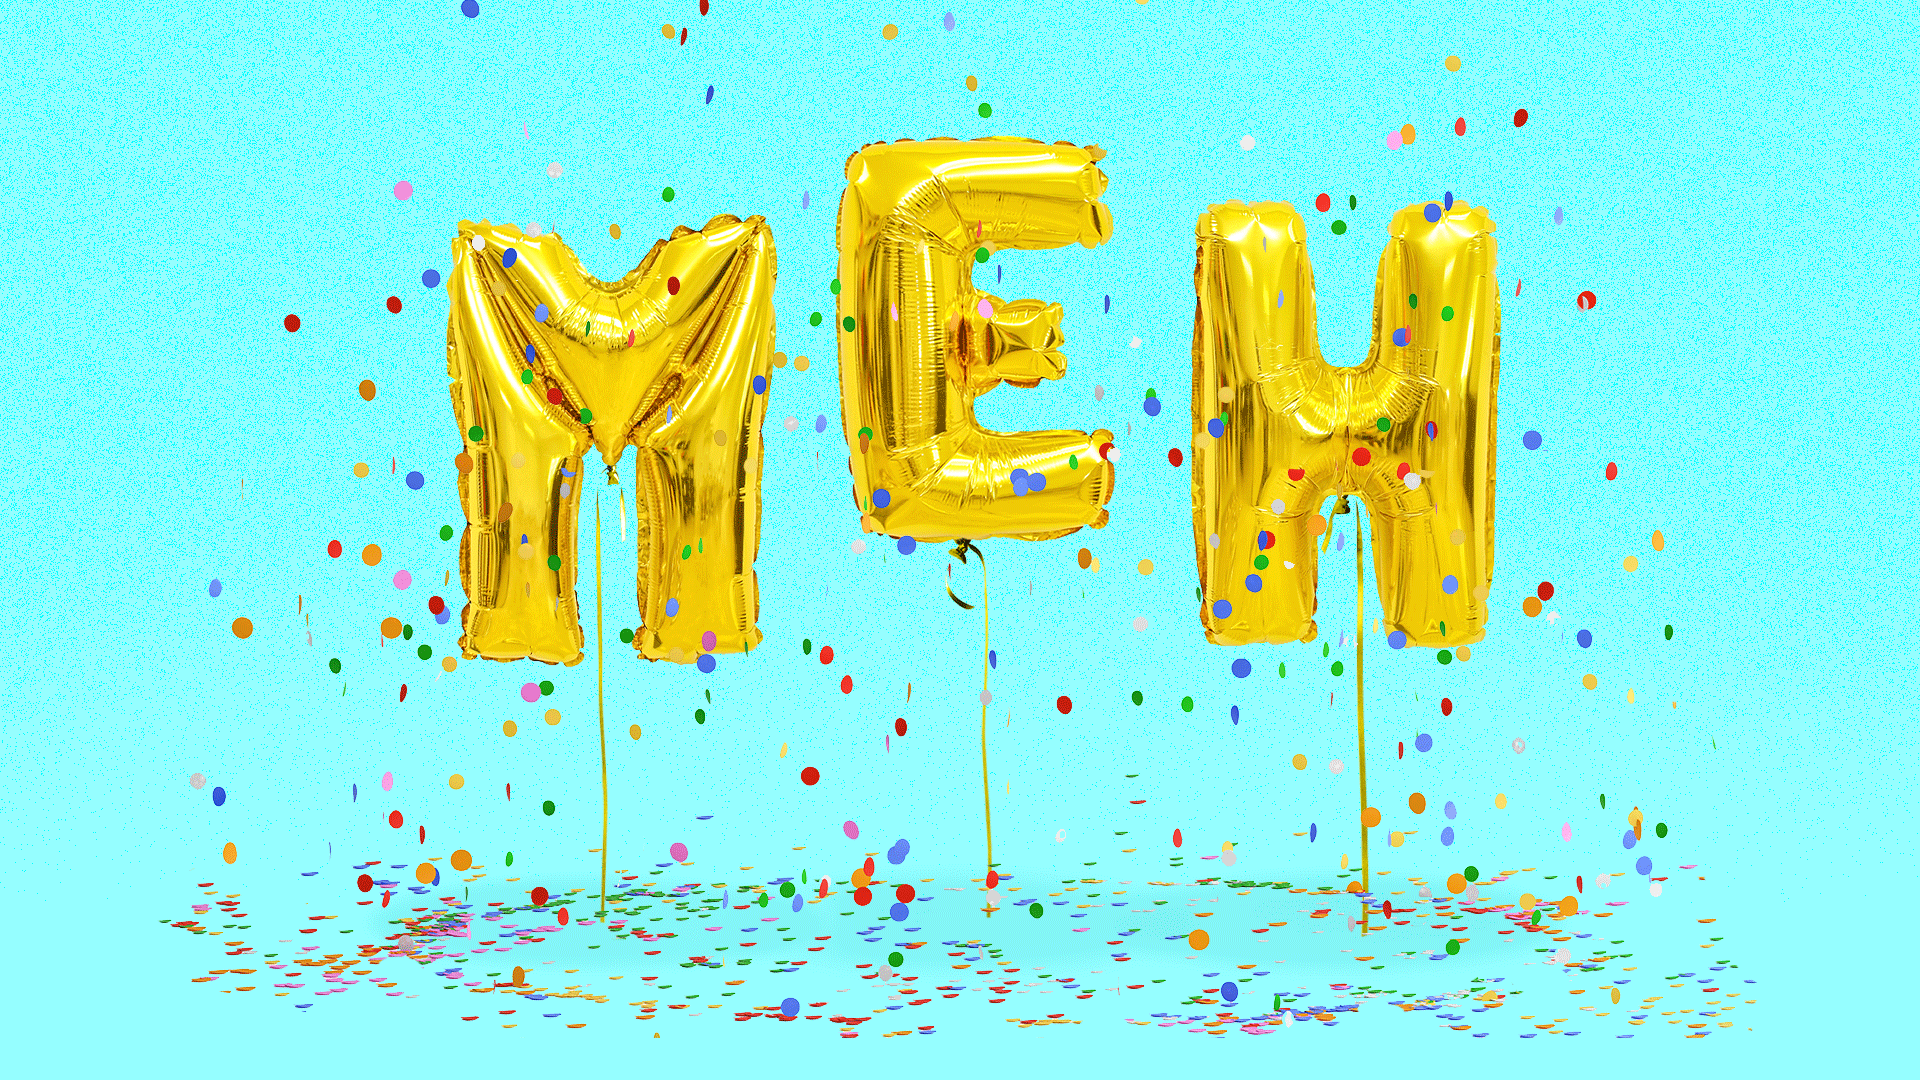 Illustration of confetti and party balloons that spell out "MEH."